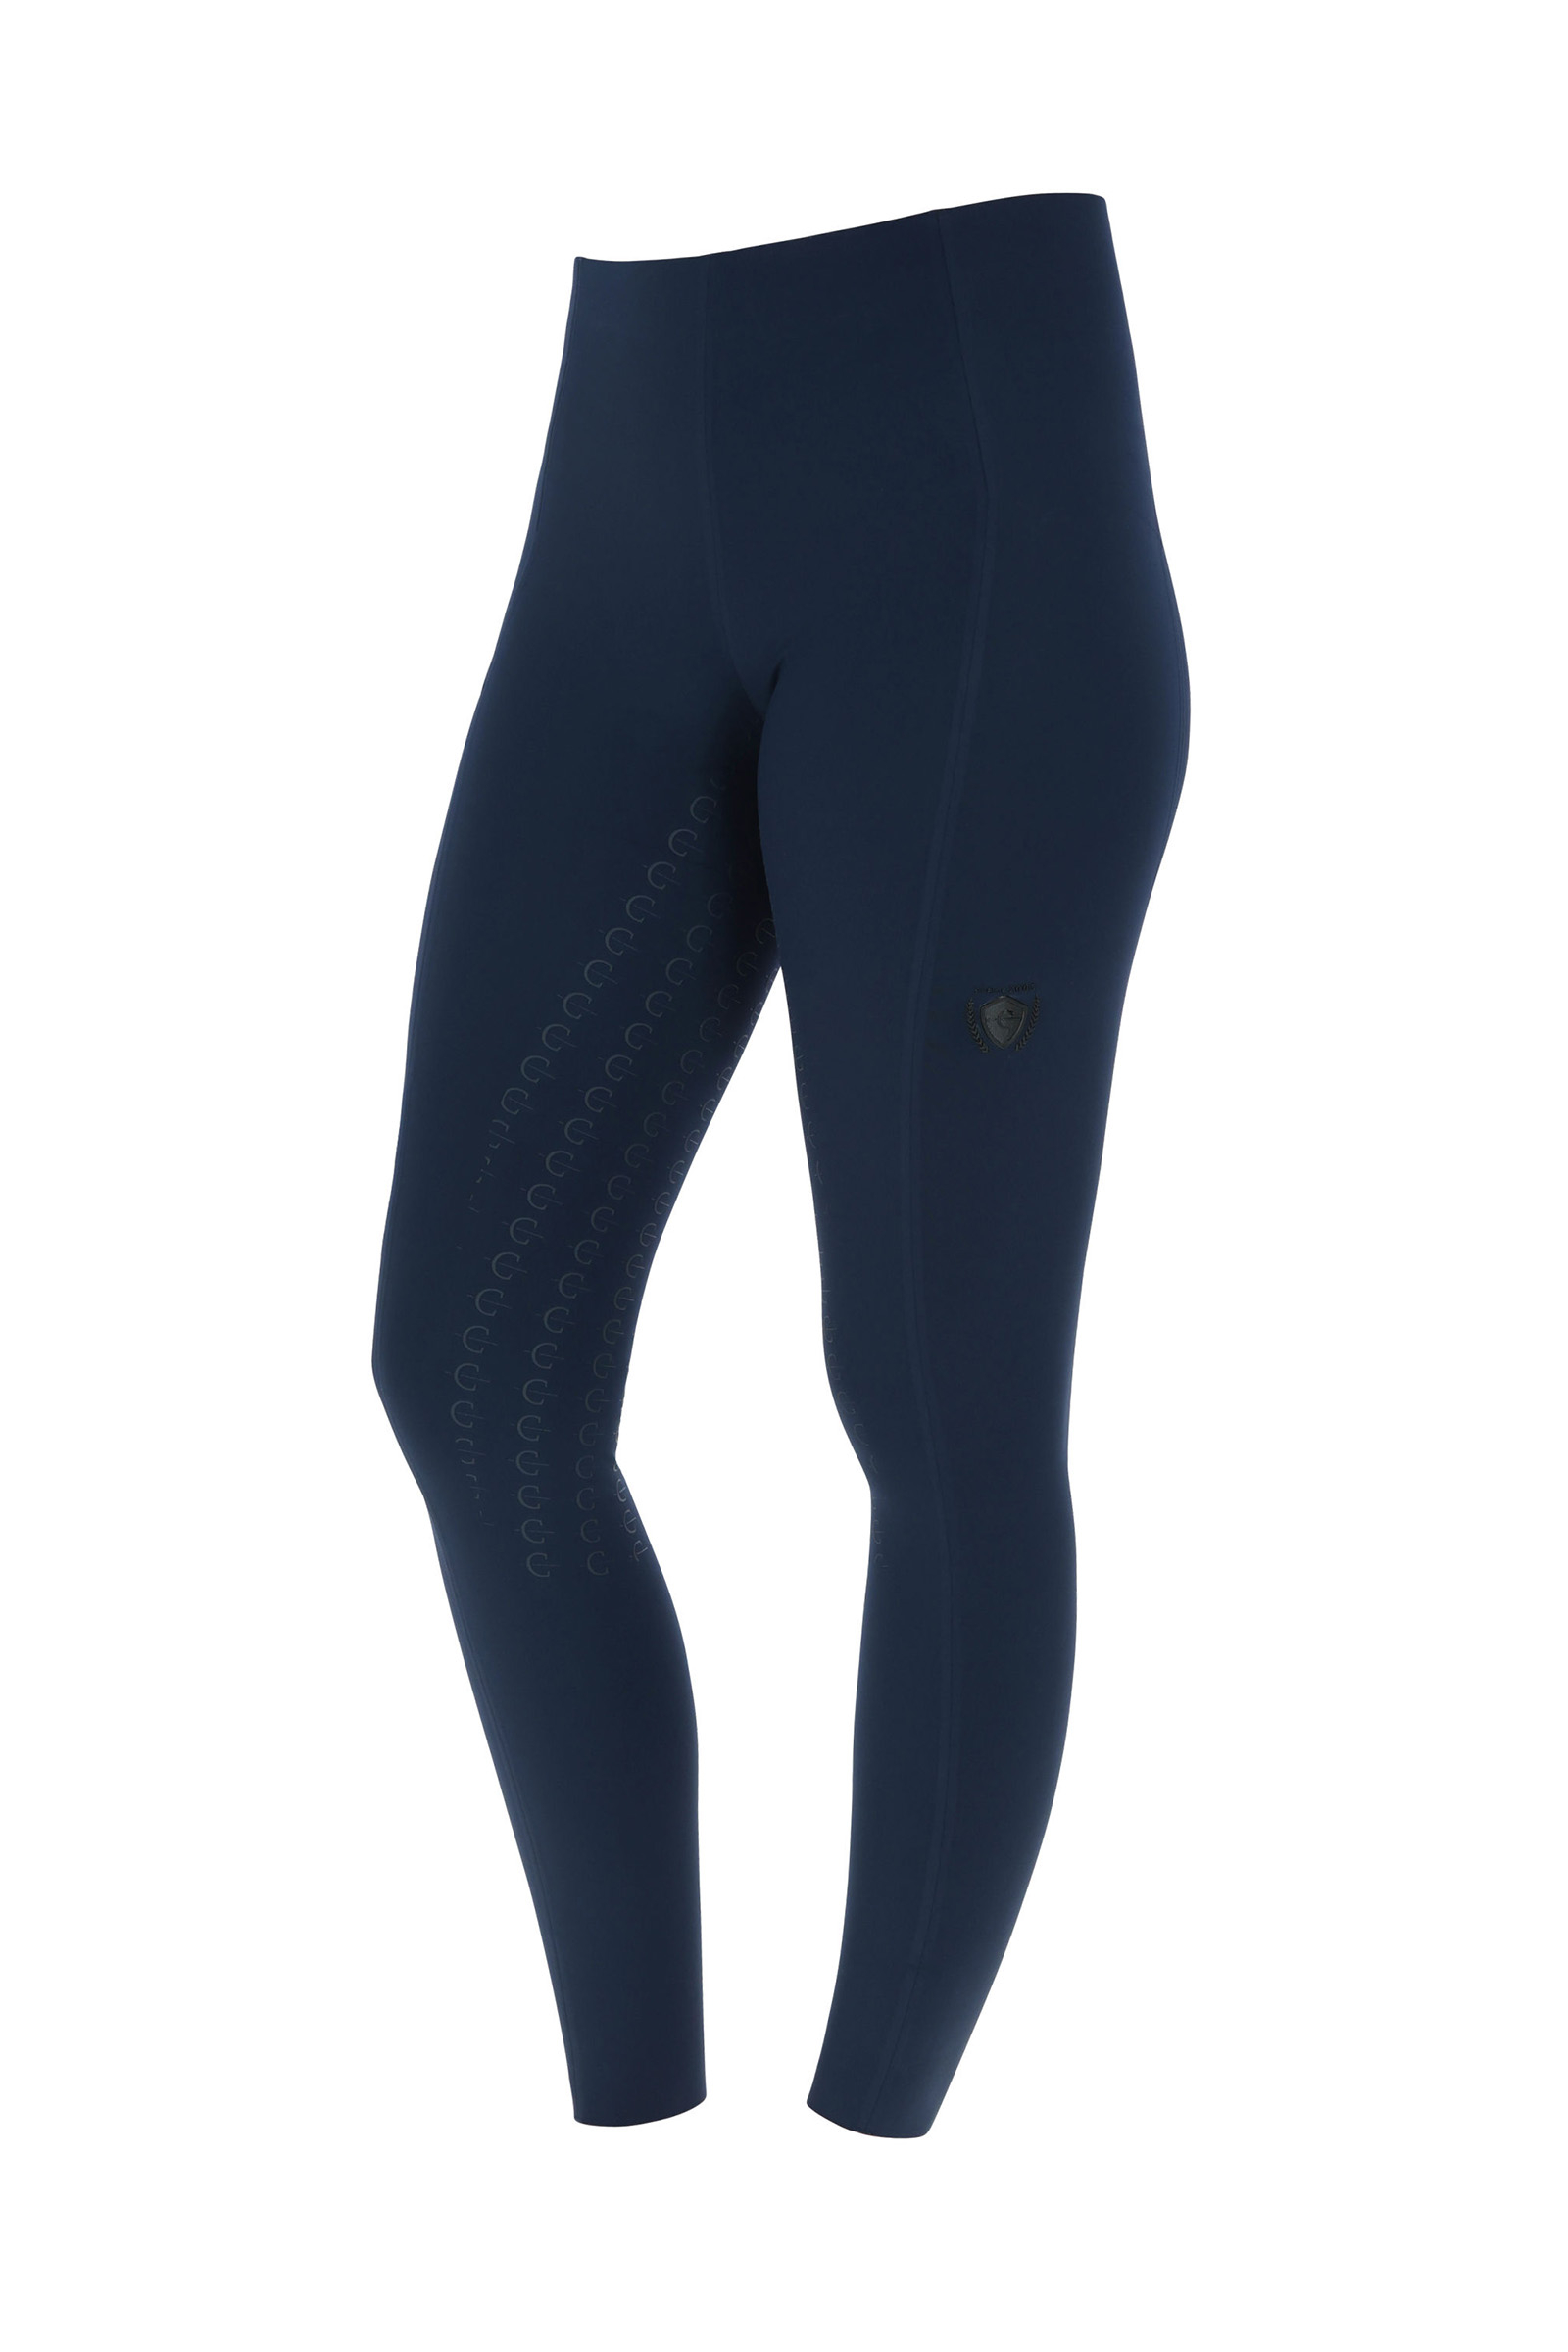 COVALLIERO SS23 KIDS RIDING TIGHTS, Dark Navy - Forever Equestrian